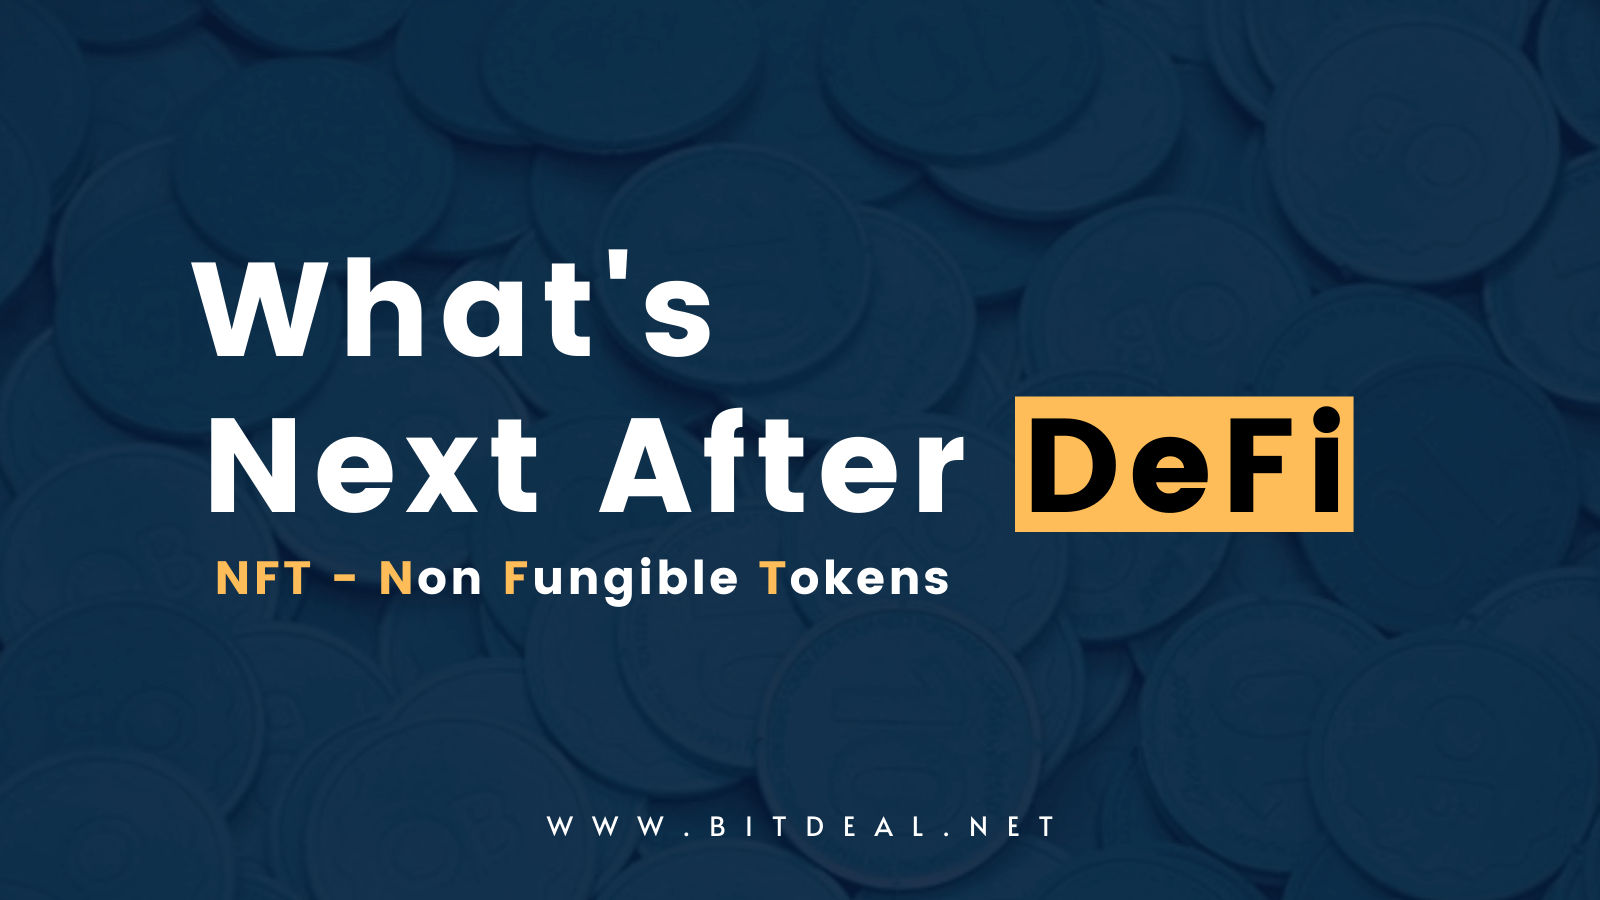 Non Fungible Tokens(NFT) - The Next Big Thing After DeFi